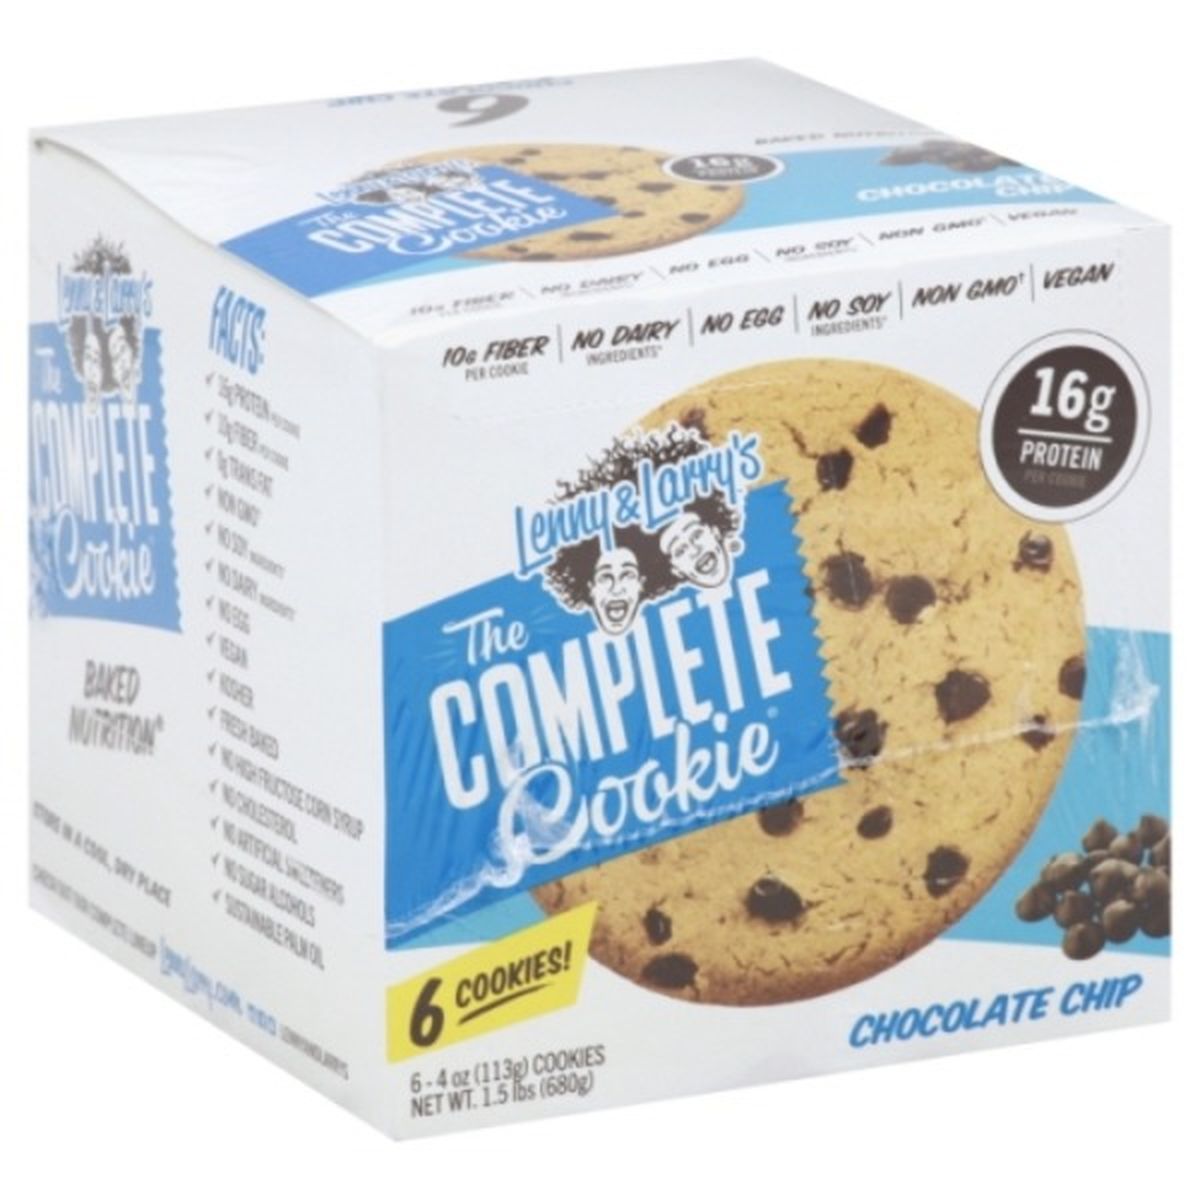 Calories in Lenny & Larry's Cookie, The Complete, Chocolate Chip